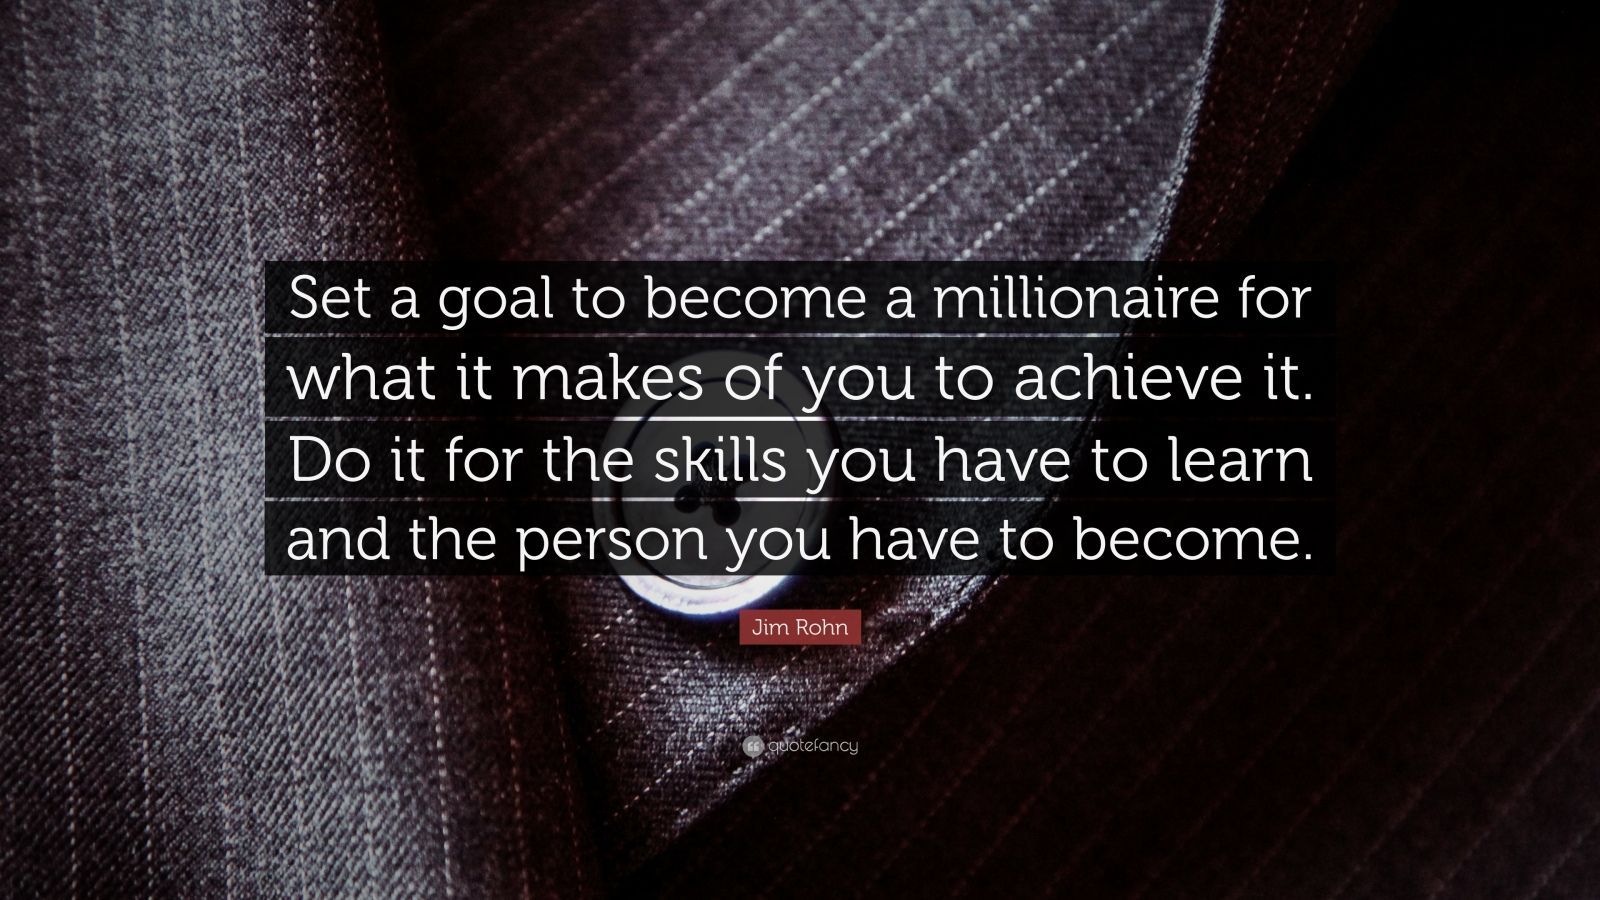 Jim Rohn Quote: “Set a goal to become a millionaire for what it makes of you to achieve it. Do it for the skills you have to learn and th.”